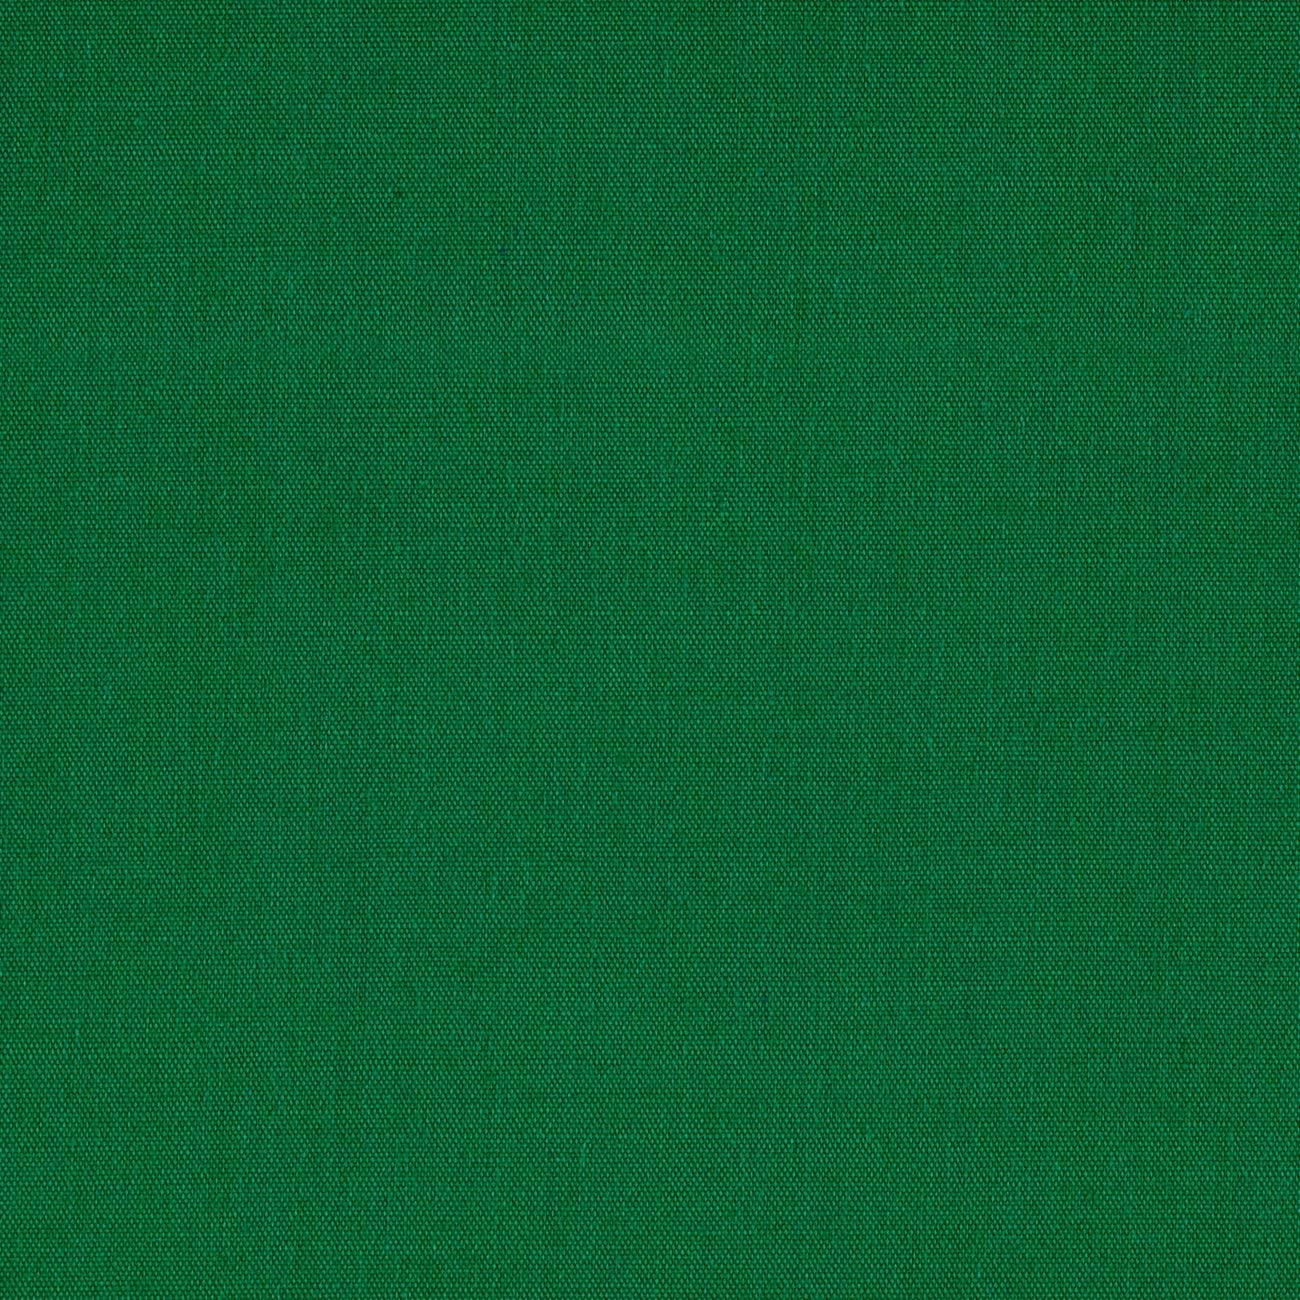 Premium Light Weight Poly Cotton Blend Broadcloth Fabric, Good to Make Face Mask Fabric (Kelly Green, 1 Yard)